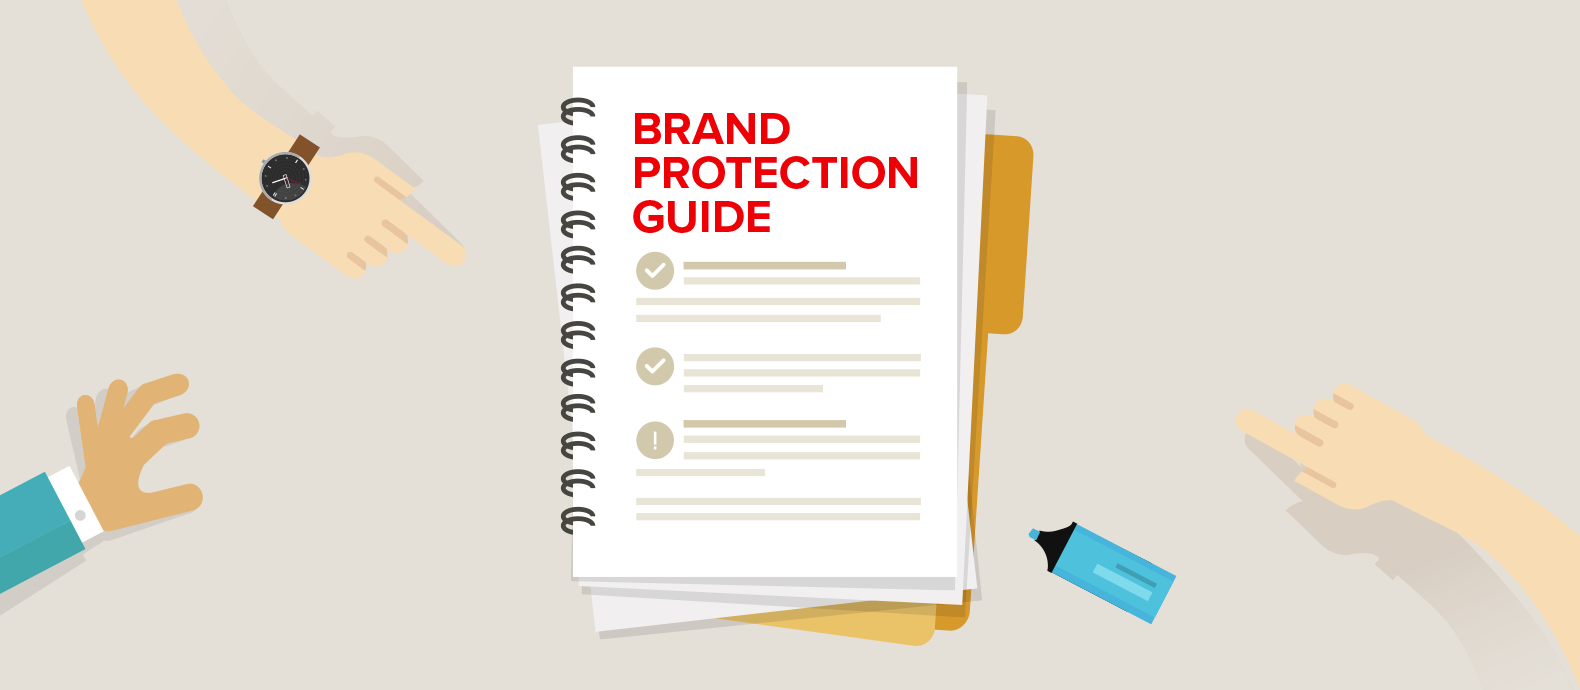 The ultimate guide to brand protection